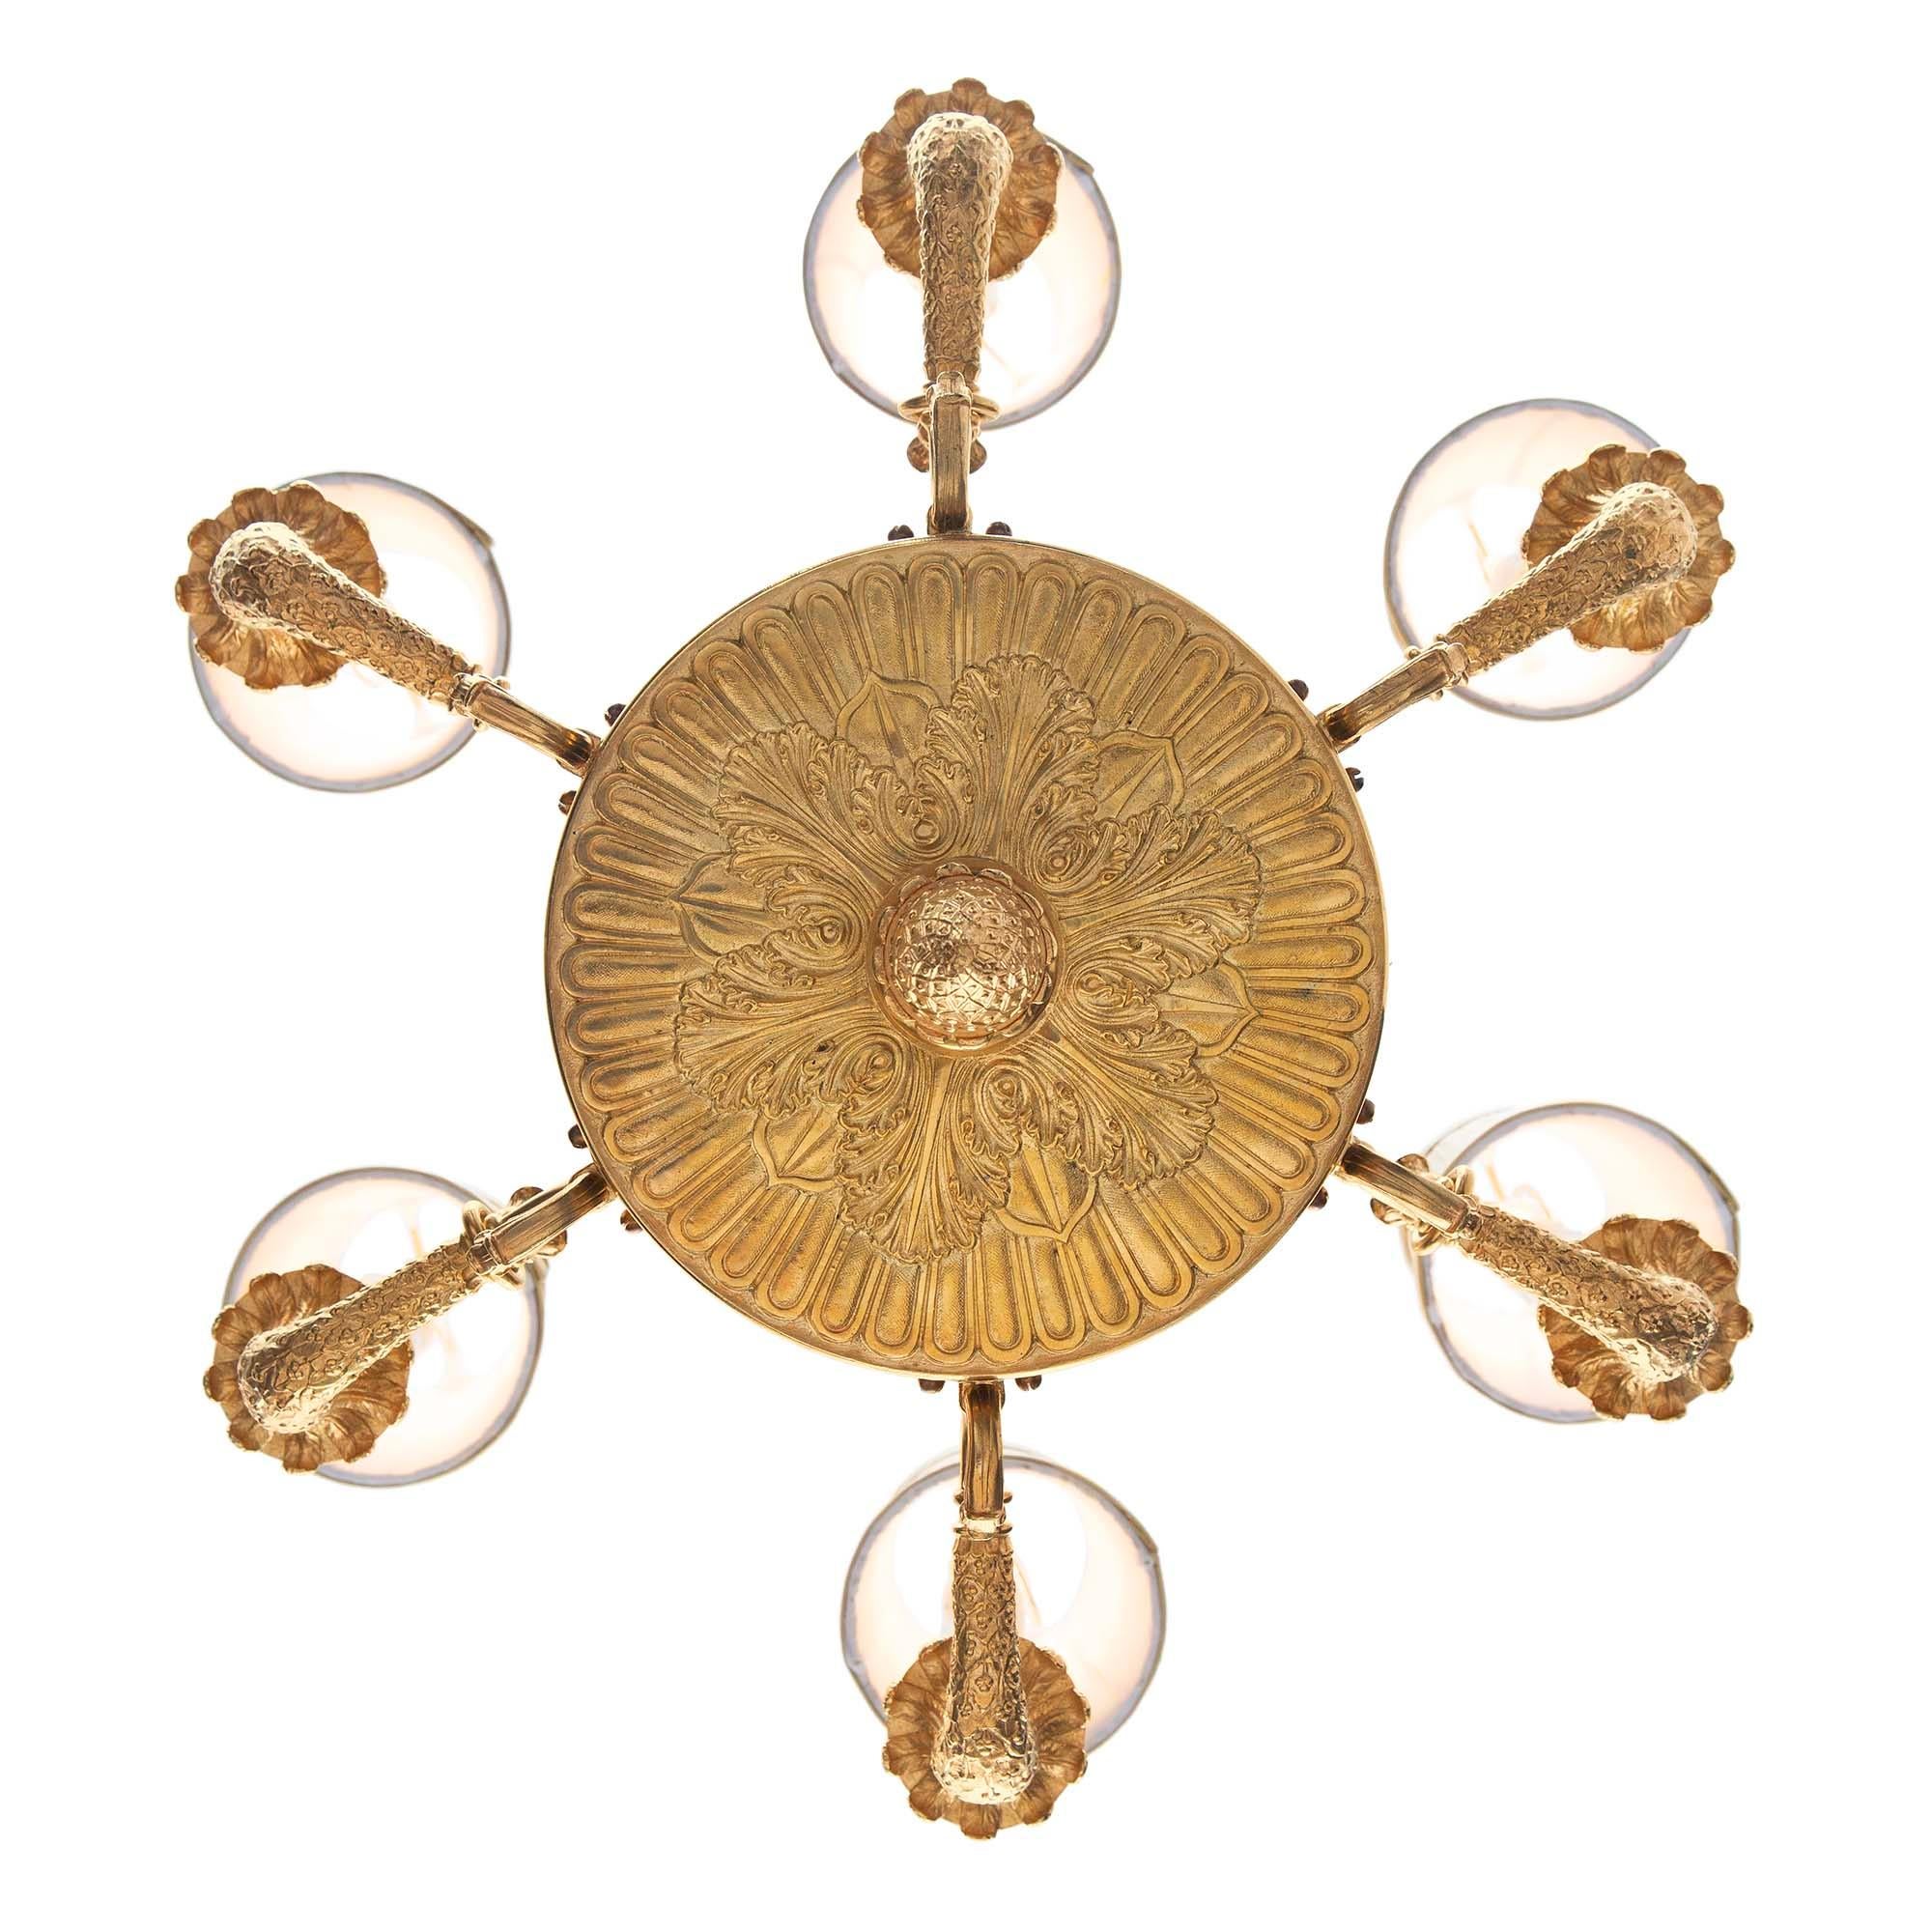 French 19th Century Empire Style Bronze and Ormolu Seven-Light Chandelier For Sale 3